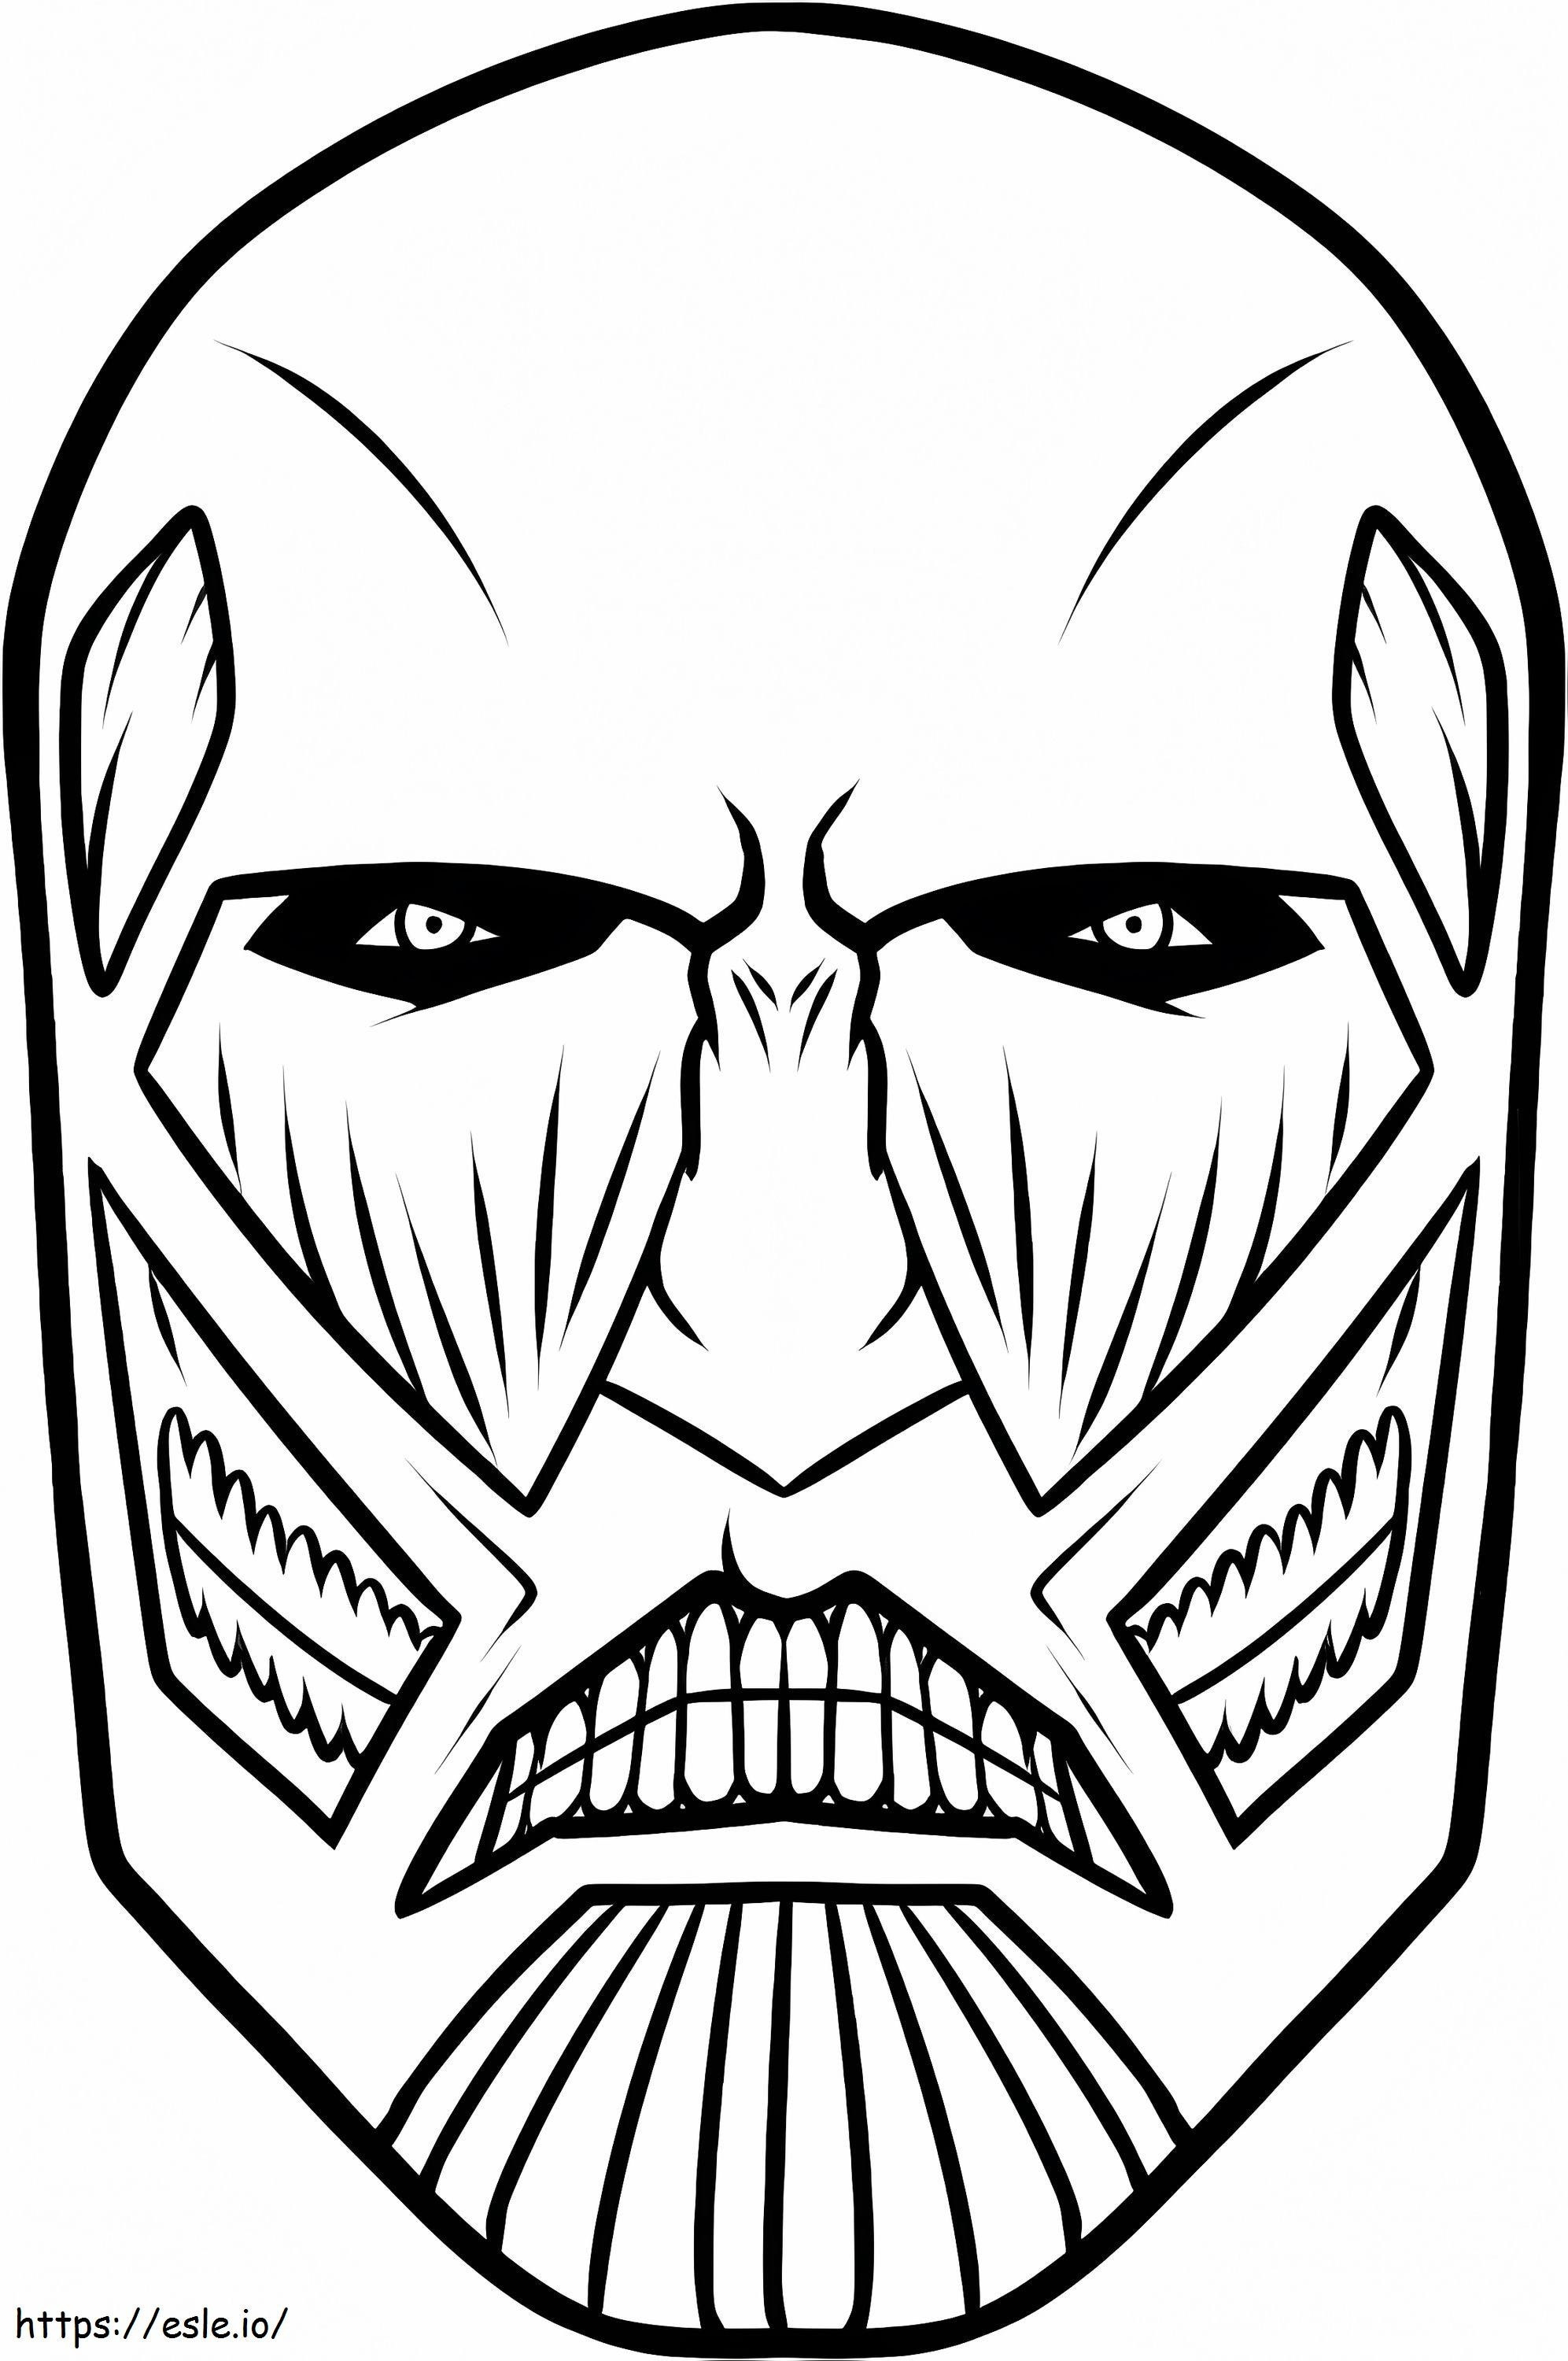 Titan Colossal 1 coloring page